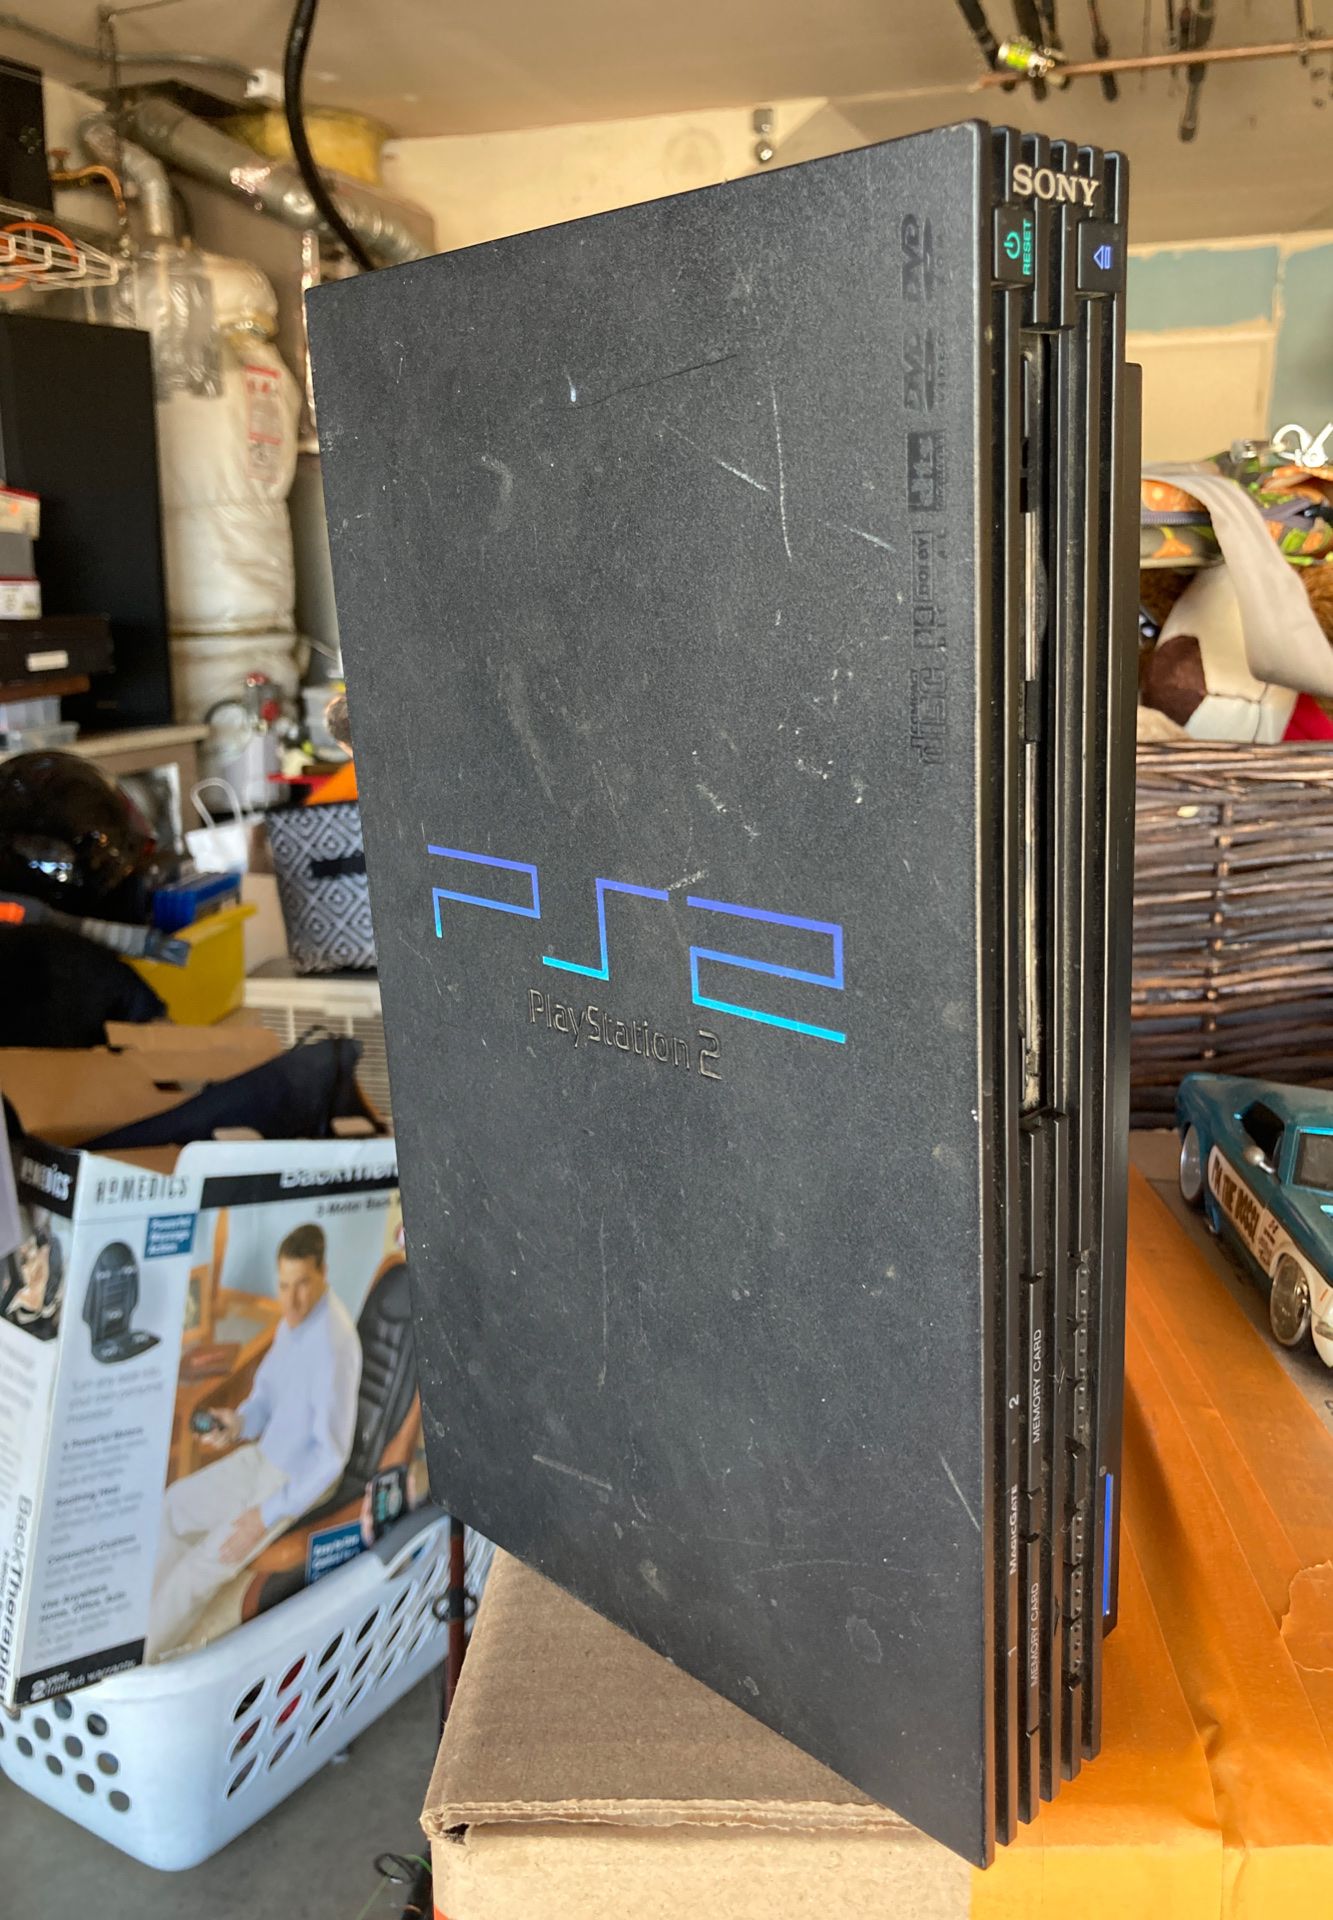 PS2 console